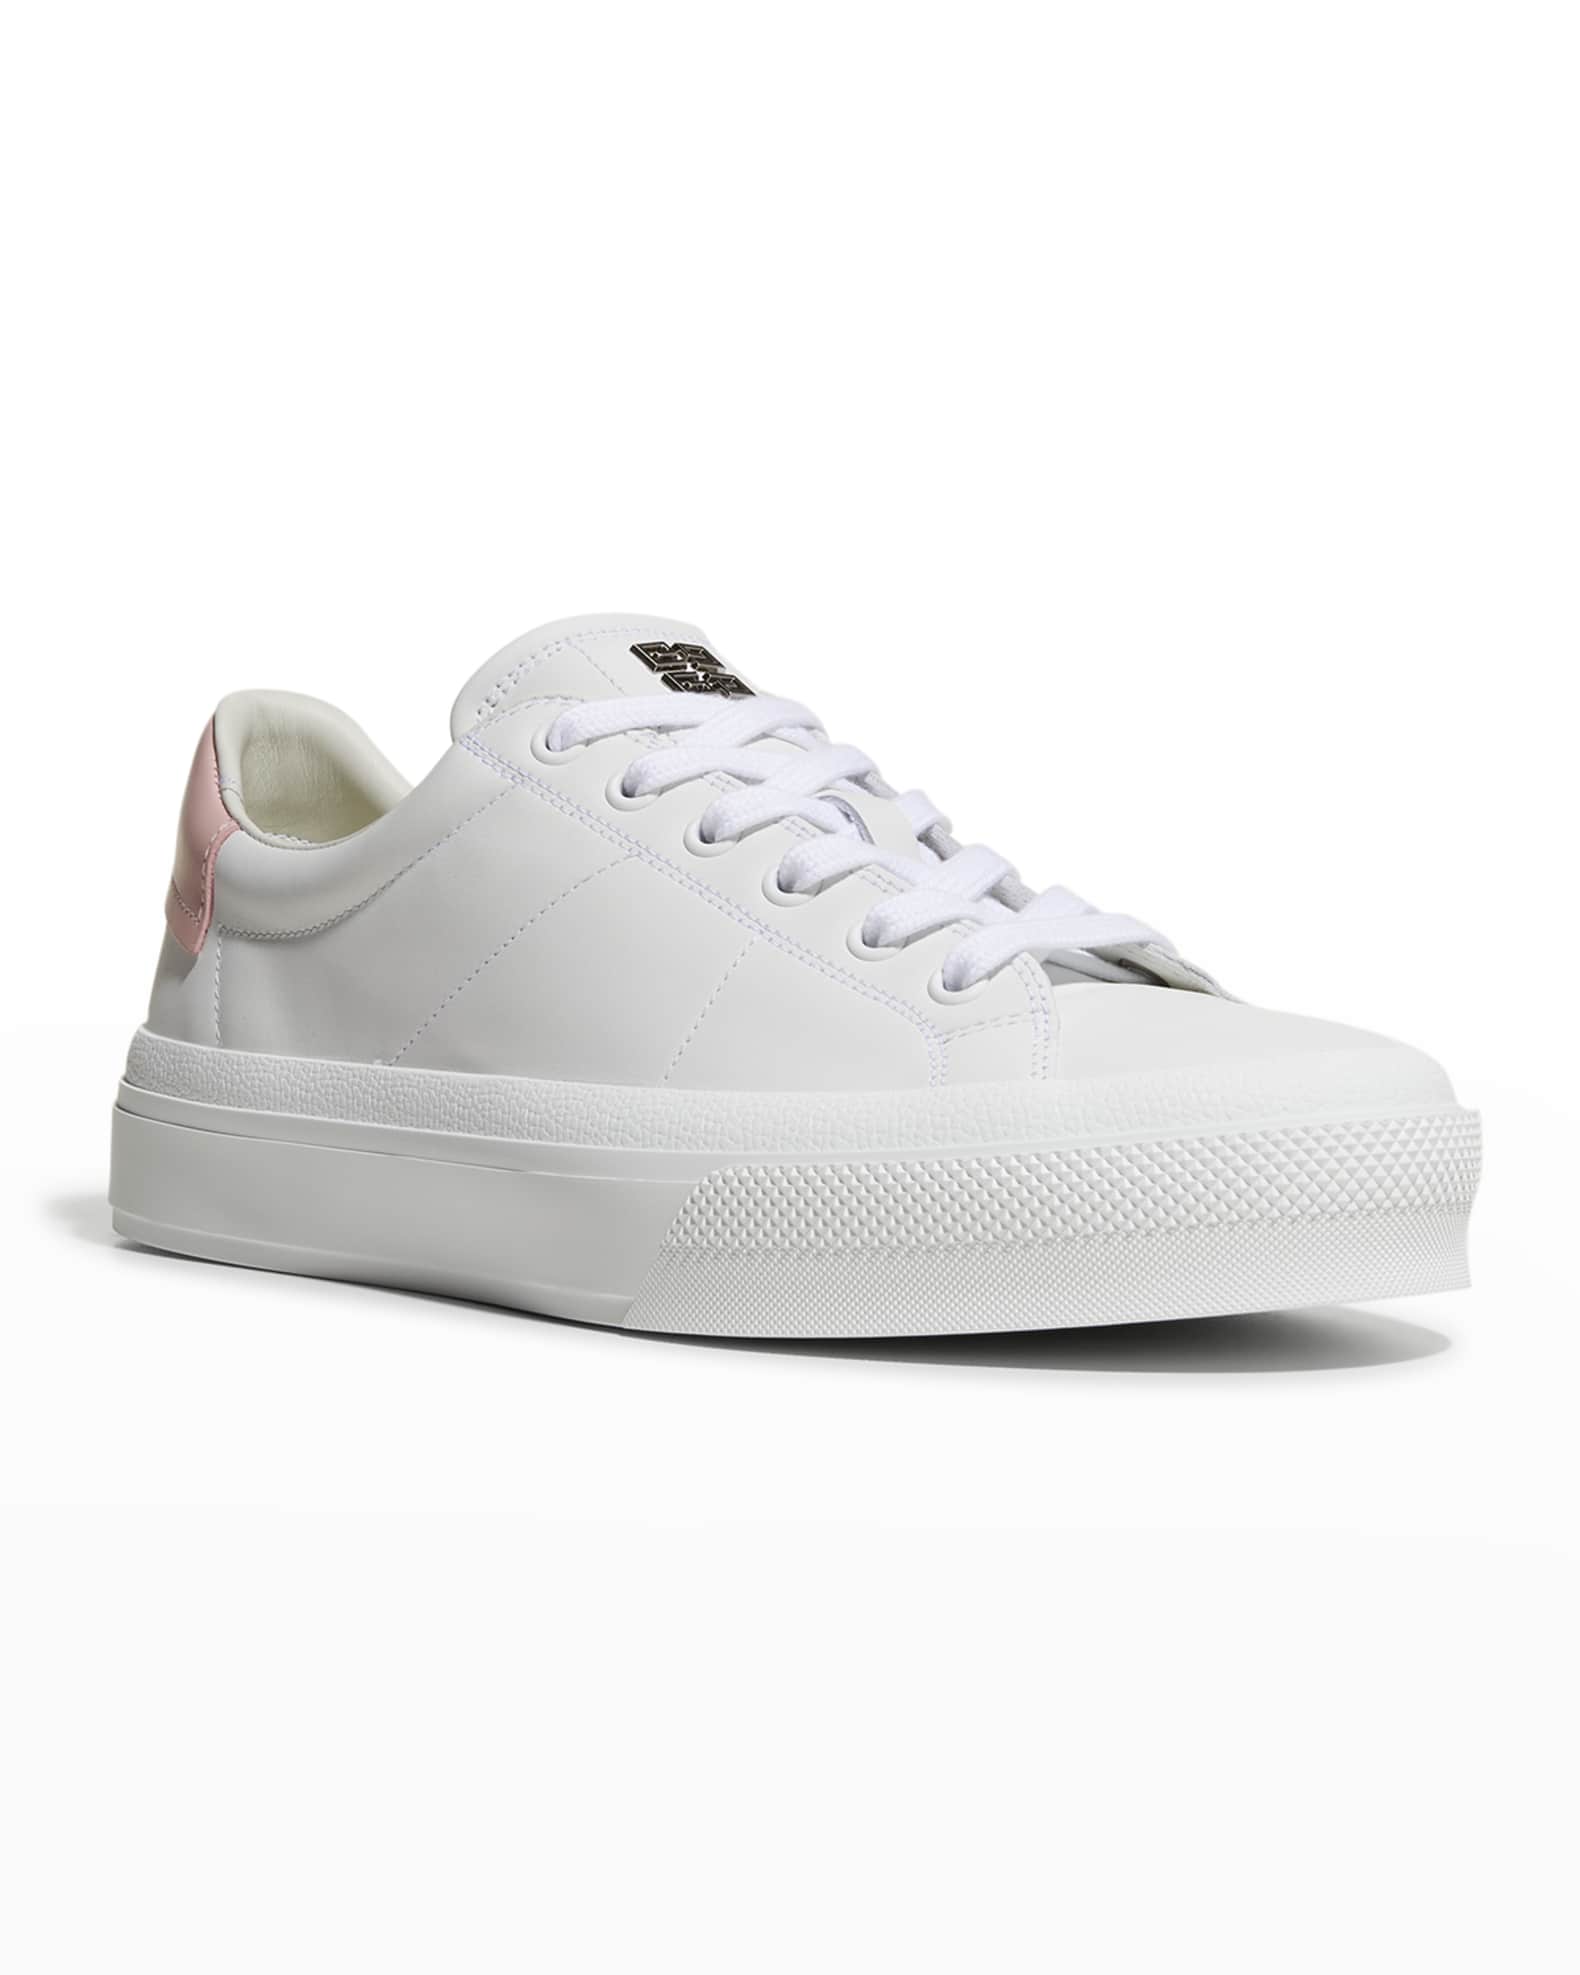 Givenchy City Sport Bicolor Low-Top Sneakers | Neiman Marcus